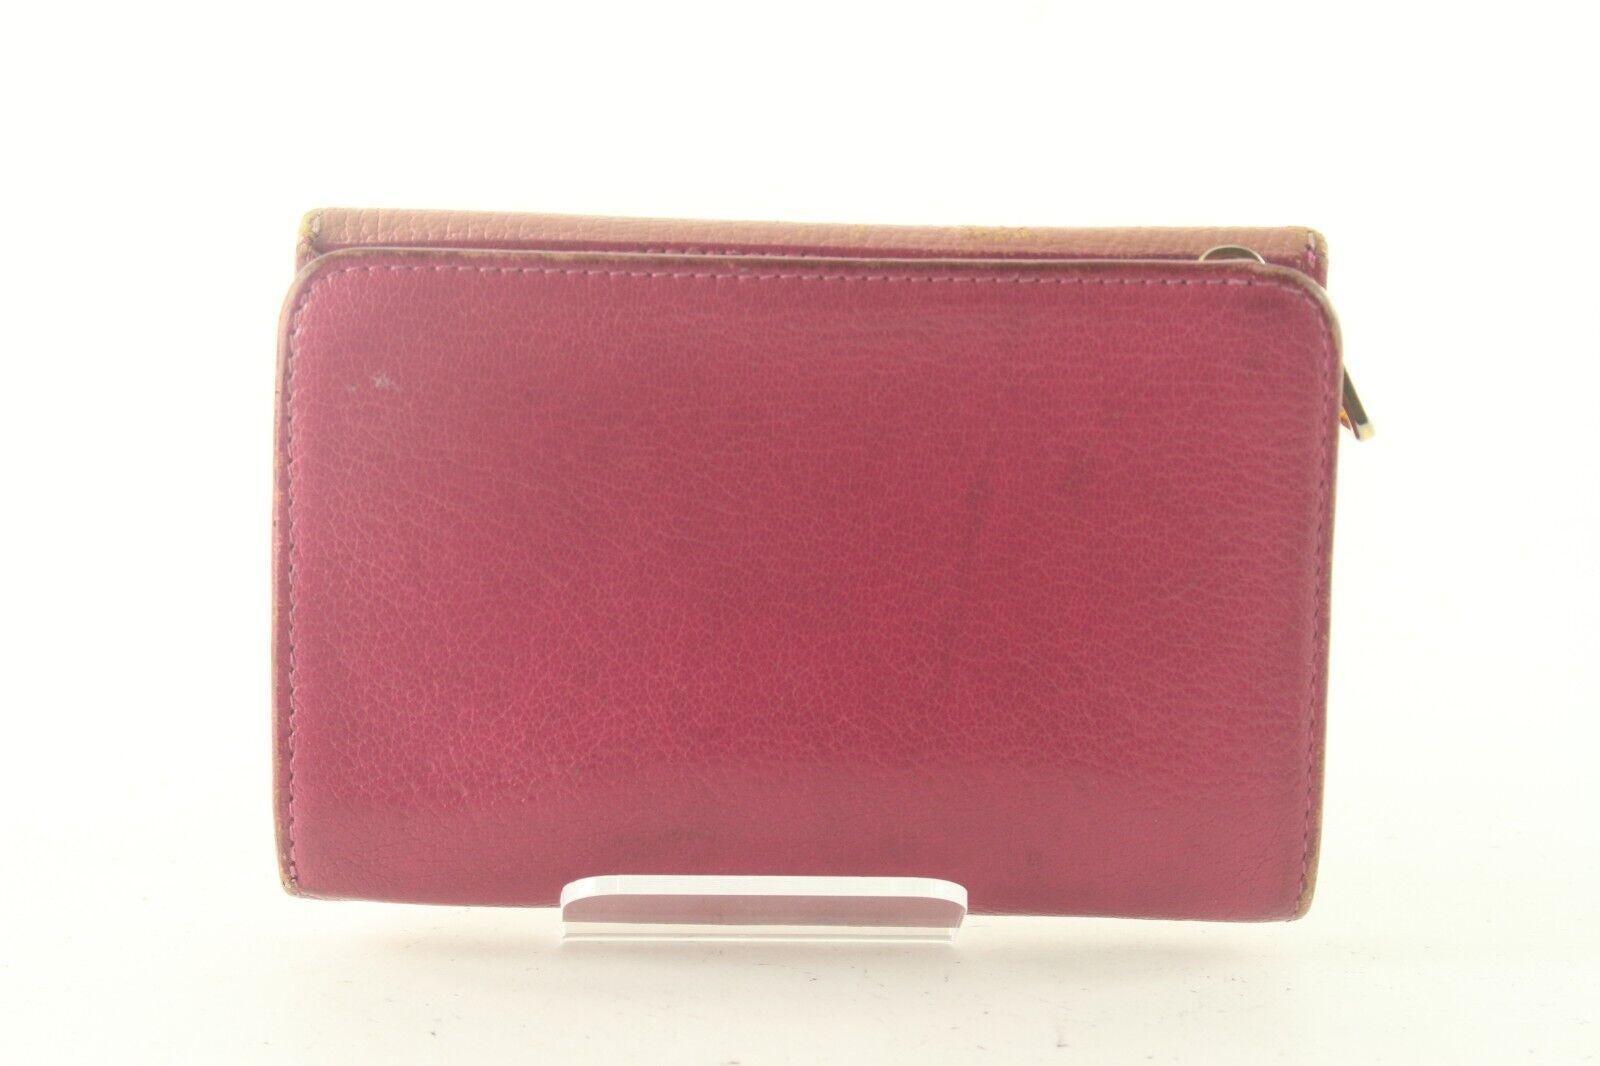 MIU MIU Pink Two Card Holder Wallet 1MIU83K In Fair Condition For Sale In Dix hills, NY